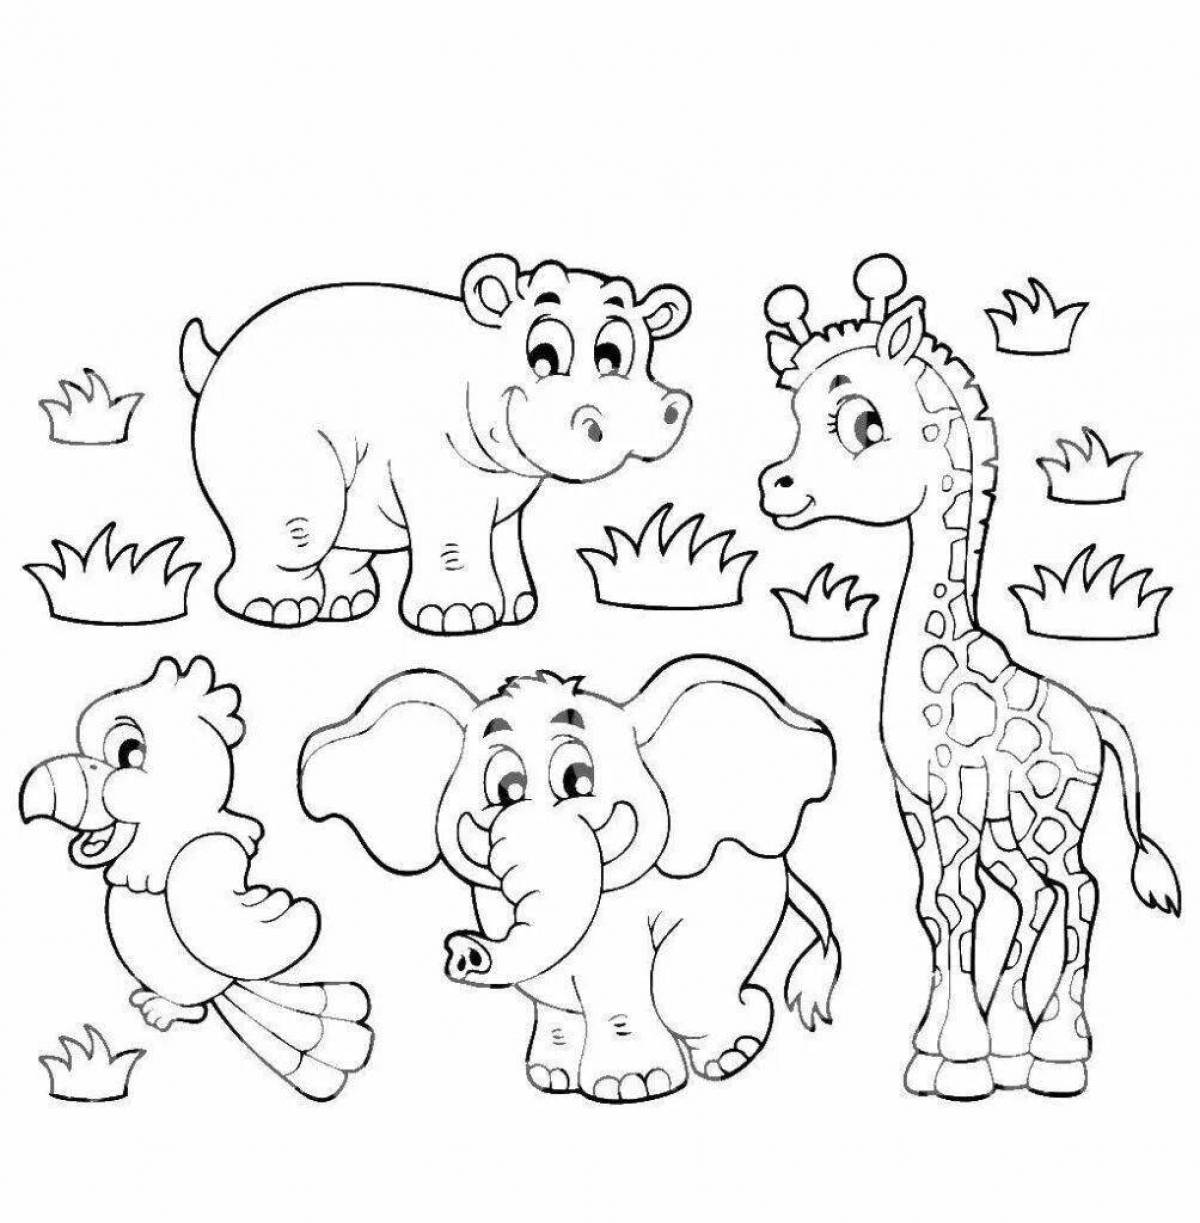 Adorable hot country animals coloring book for 4 year olds